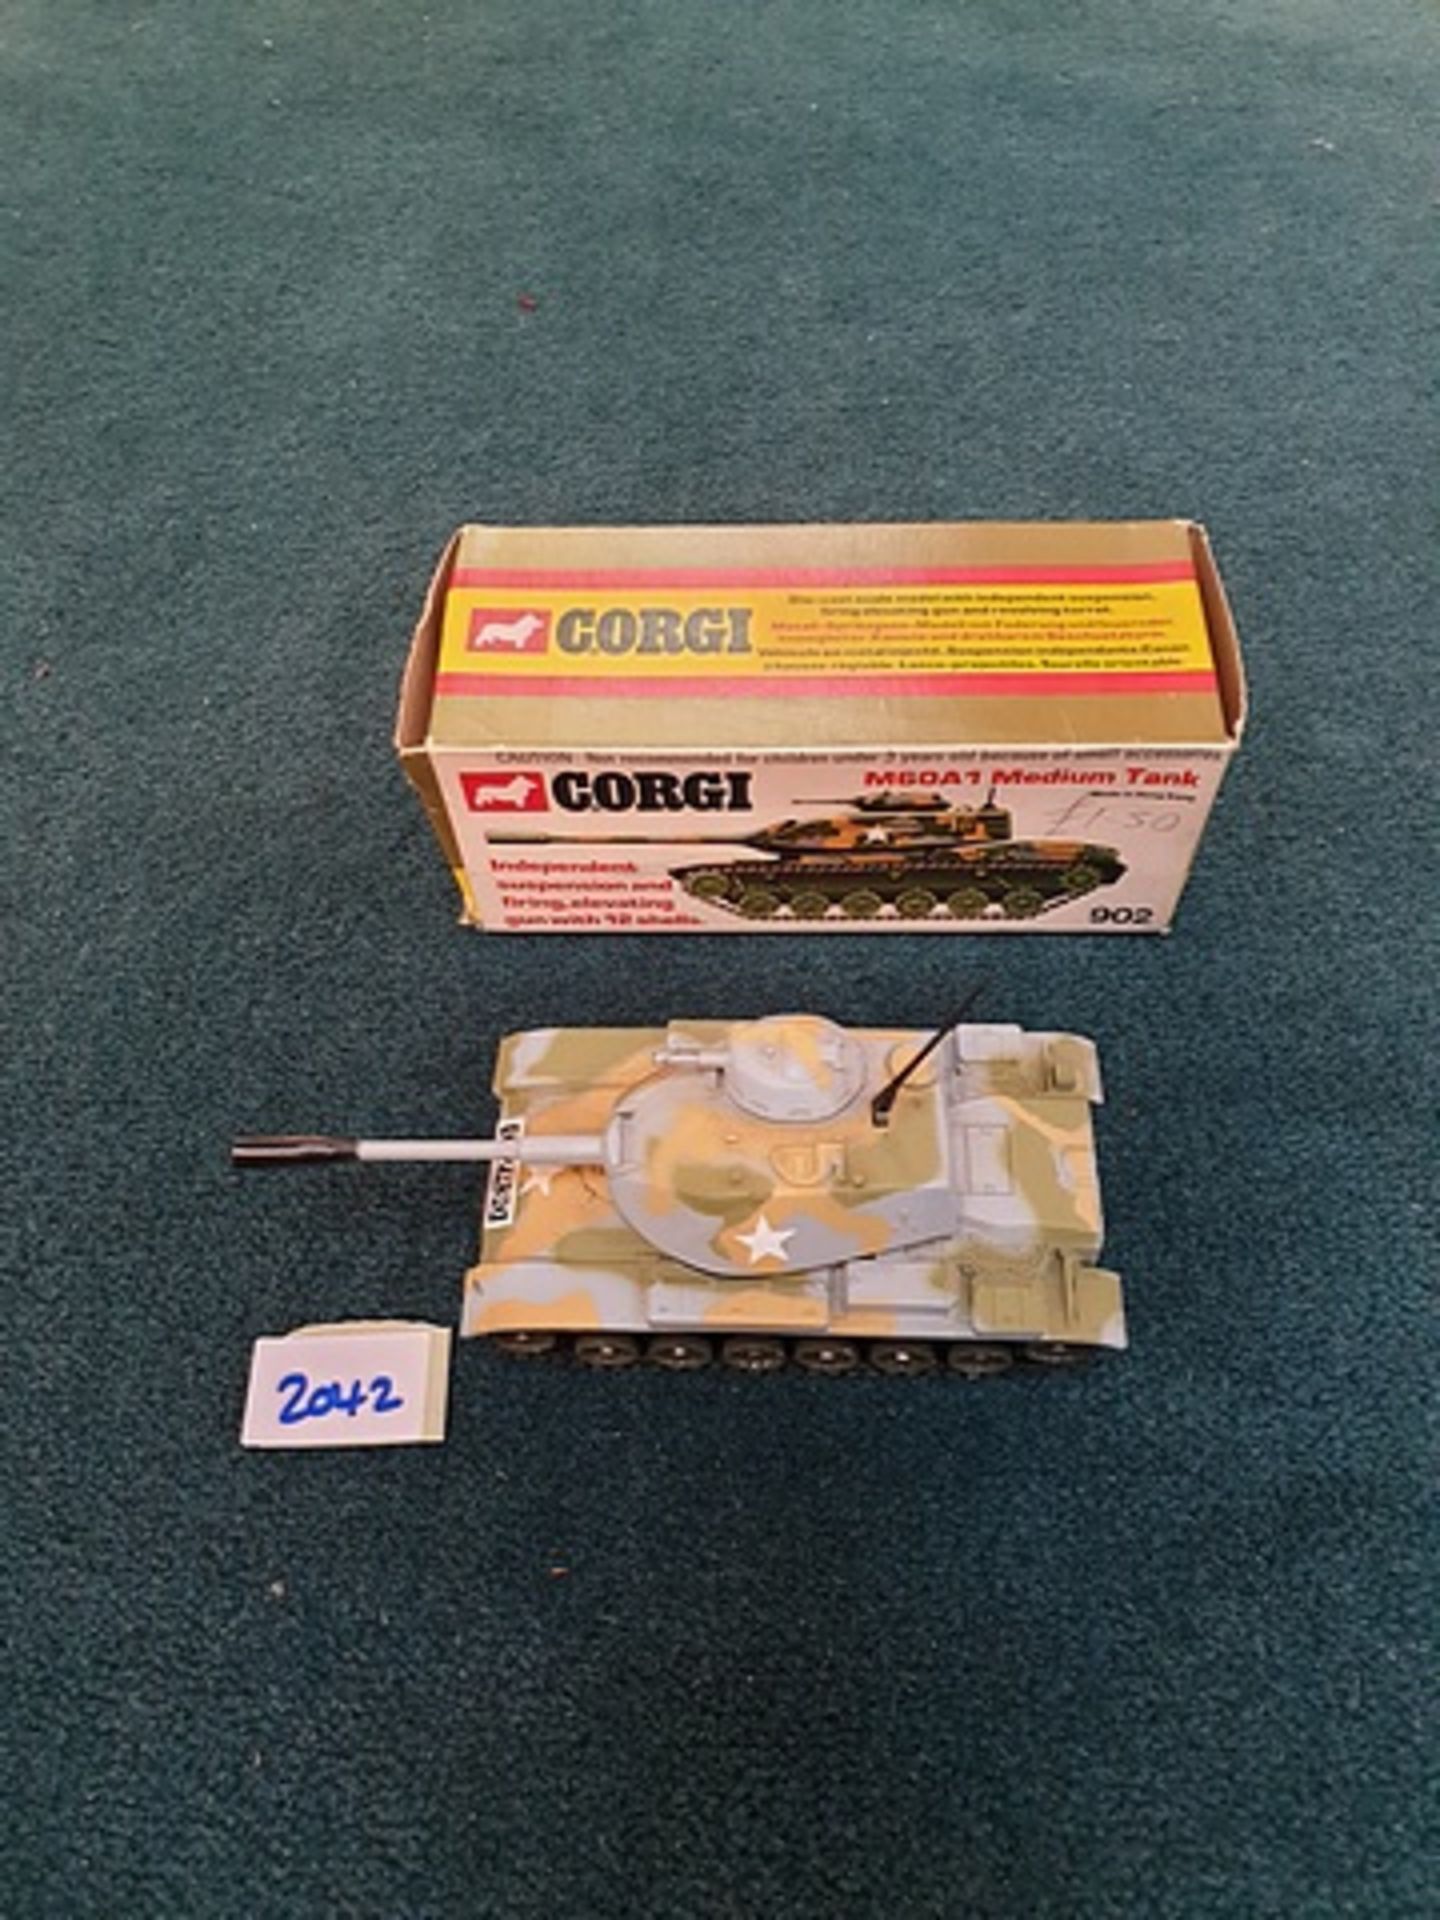 Corgi #902 M60a1 Medium Camouflage Complete With Box Measures Approximately 4.5" Long X 2" Wide X 2"